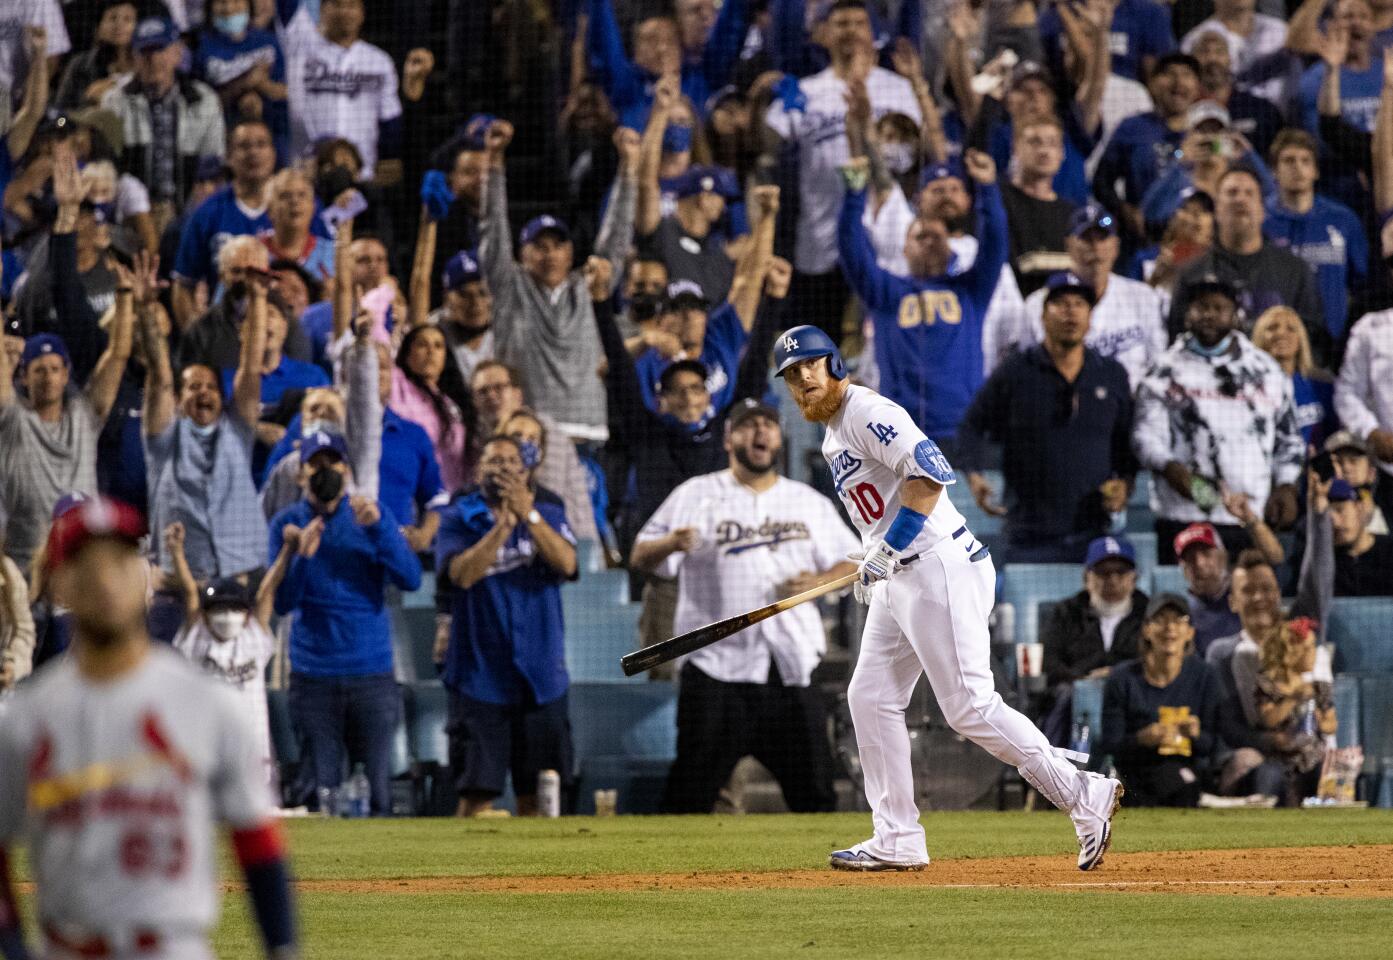 Fans react as Los Angeles Dodgers third baseman Justin Turner watches his solo homer clear the left field wall